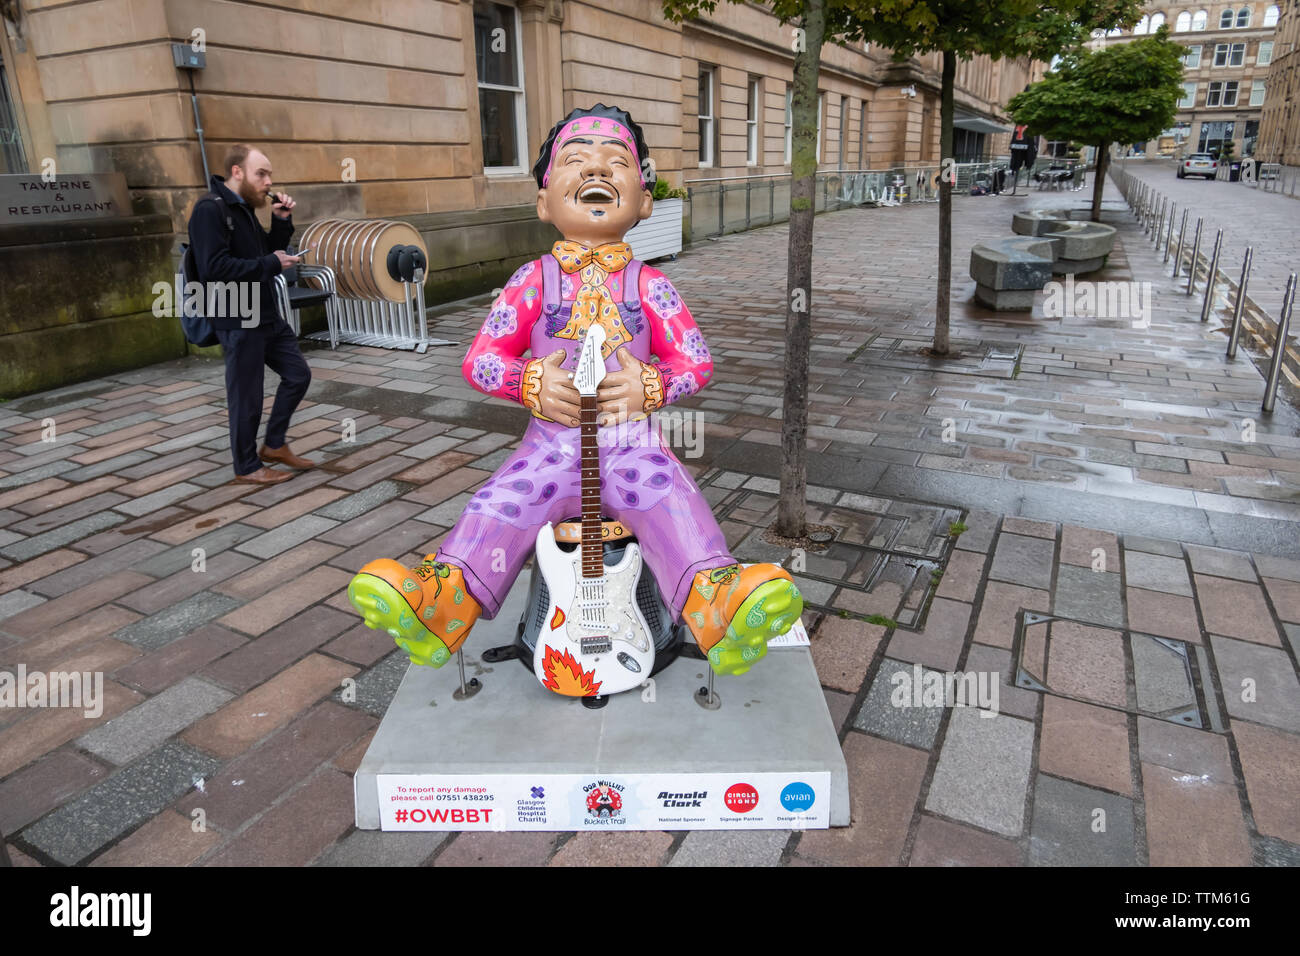 Glasgow, Scotland, UK. 17th June, 2019. Oor Jimi, created by Betti Moretti. The Jimi Hendrix Experience performed in Glasgow twice. Hendrix literally brought the house down with his performance by setting fire to his famous guitar on stage, This statue is in honour of Scotland's rich music history, complete with a replica of his legendary guitar. The sculpture is part of Oor Wullie’s BIG Bucket Trail. Credit: Skully/Alamy Live News Stock Photo